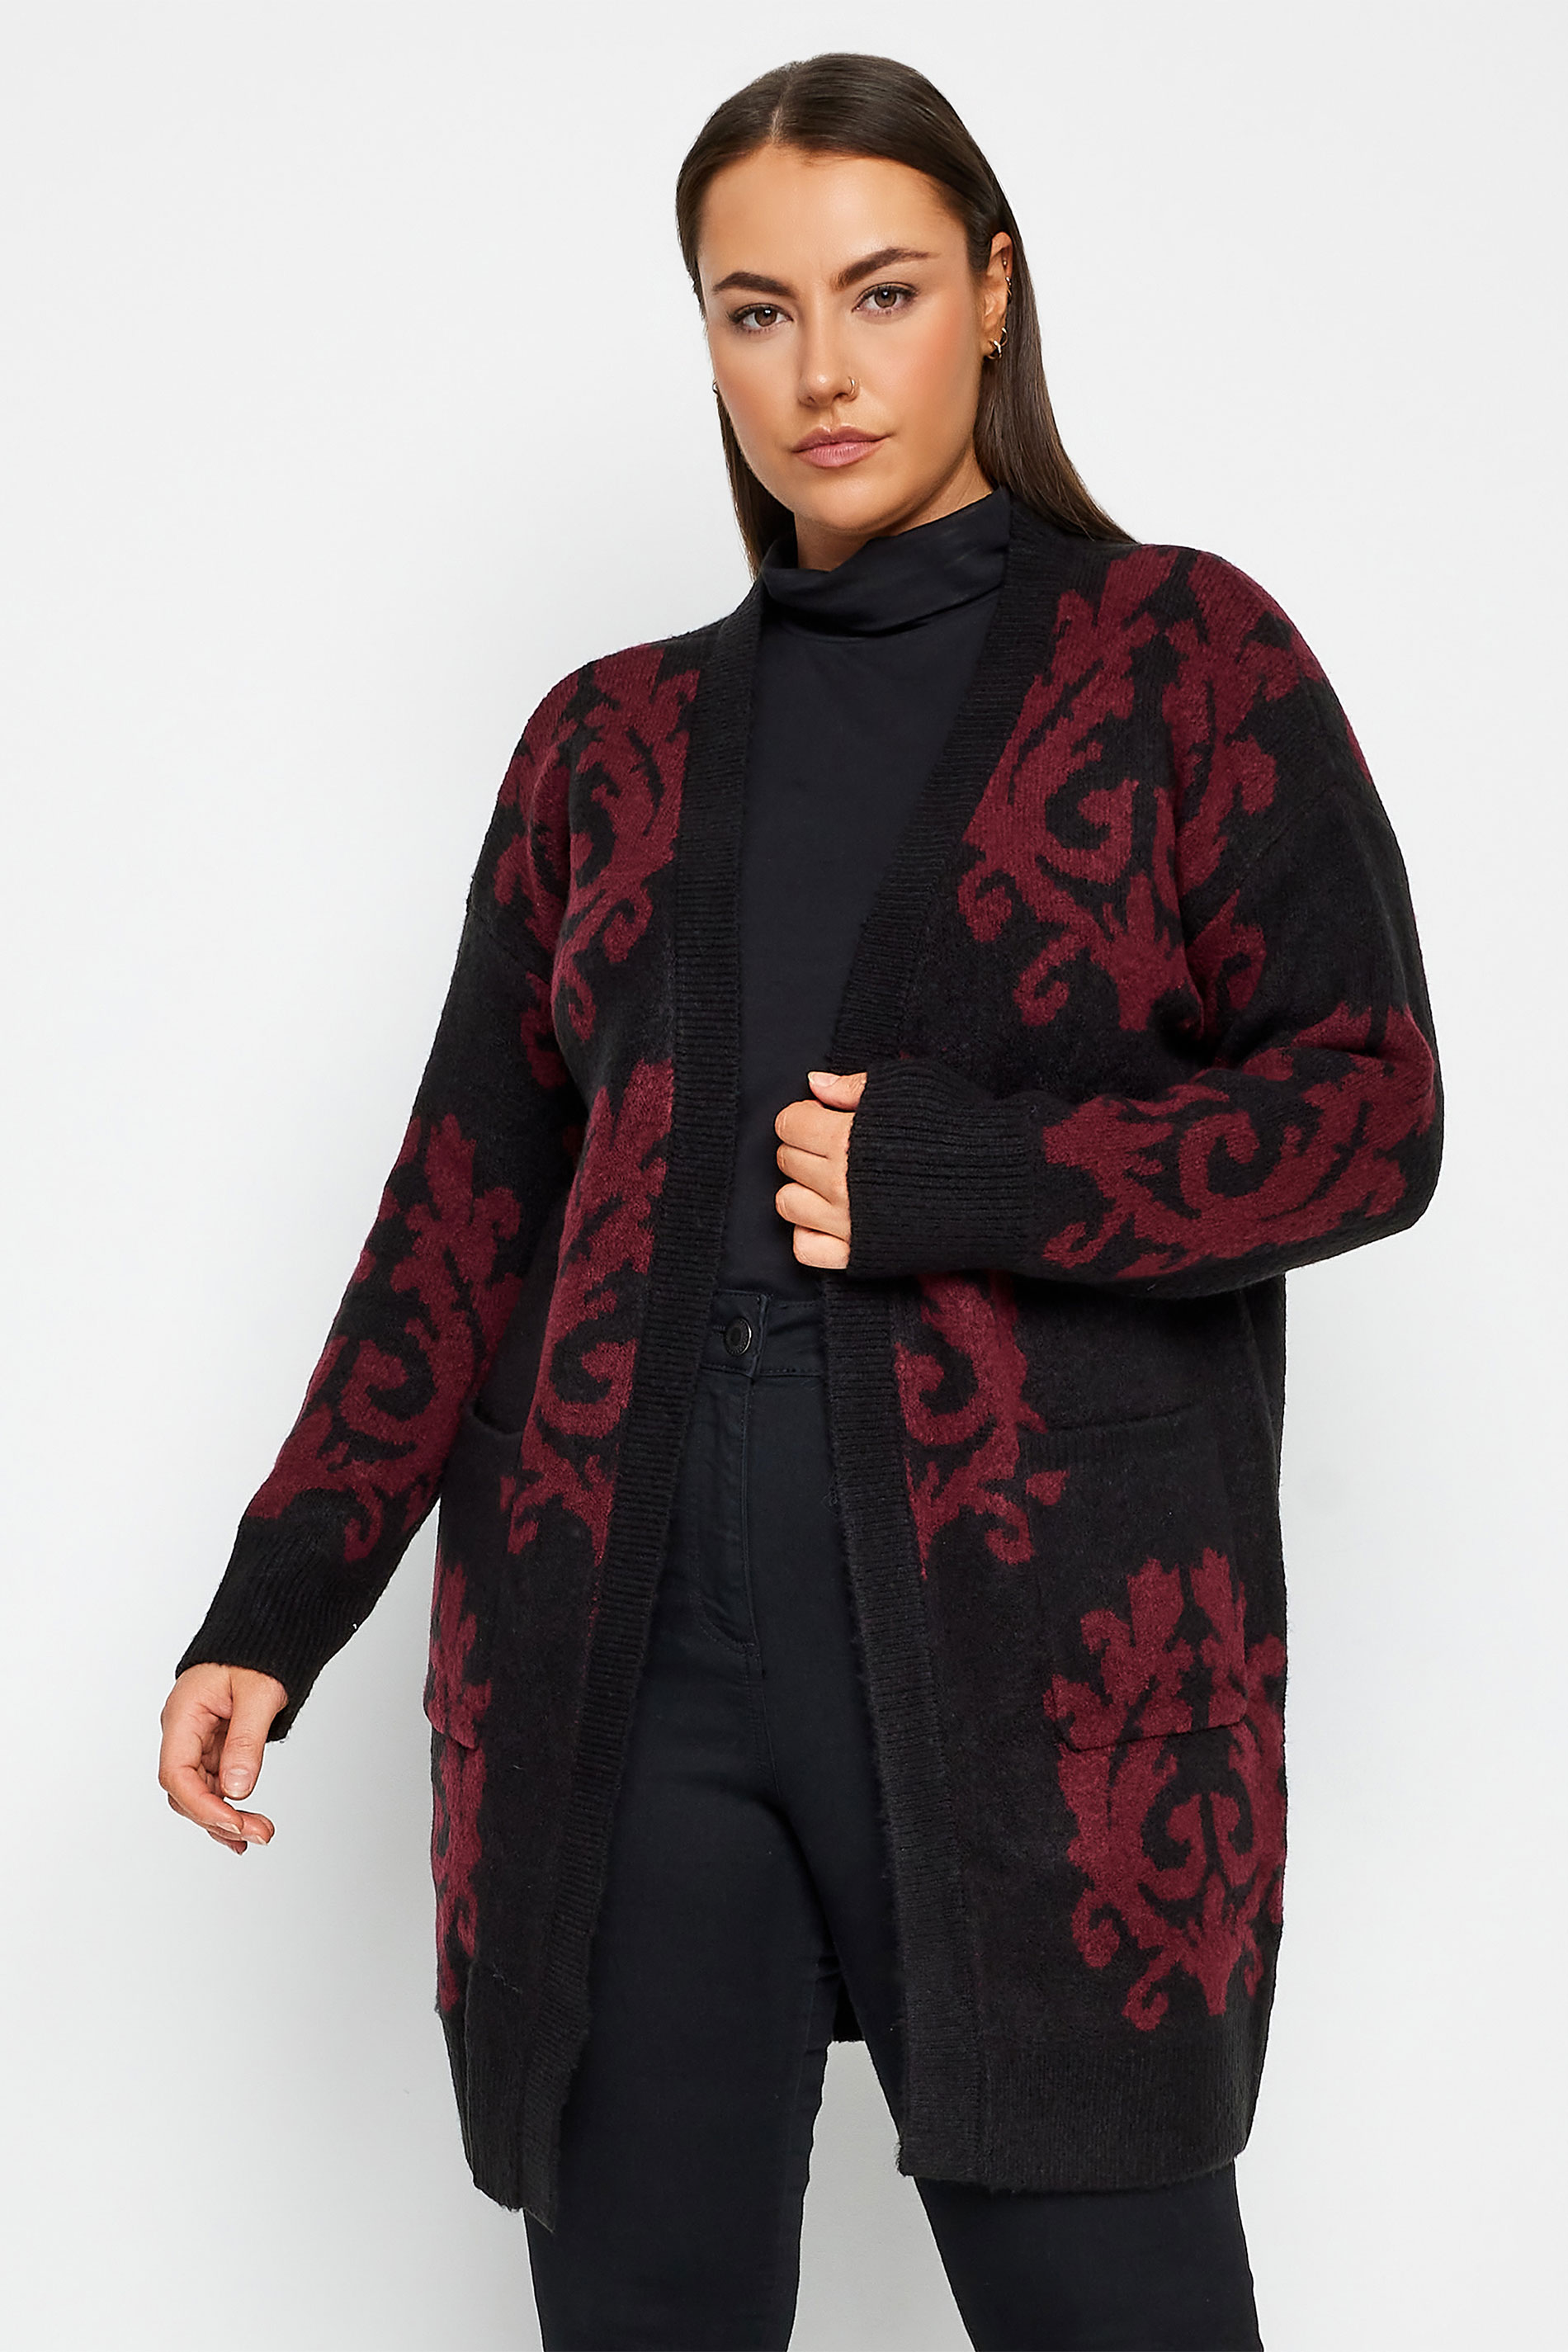 Evans Black & Red Knitted Cardigan 1